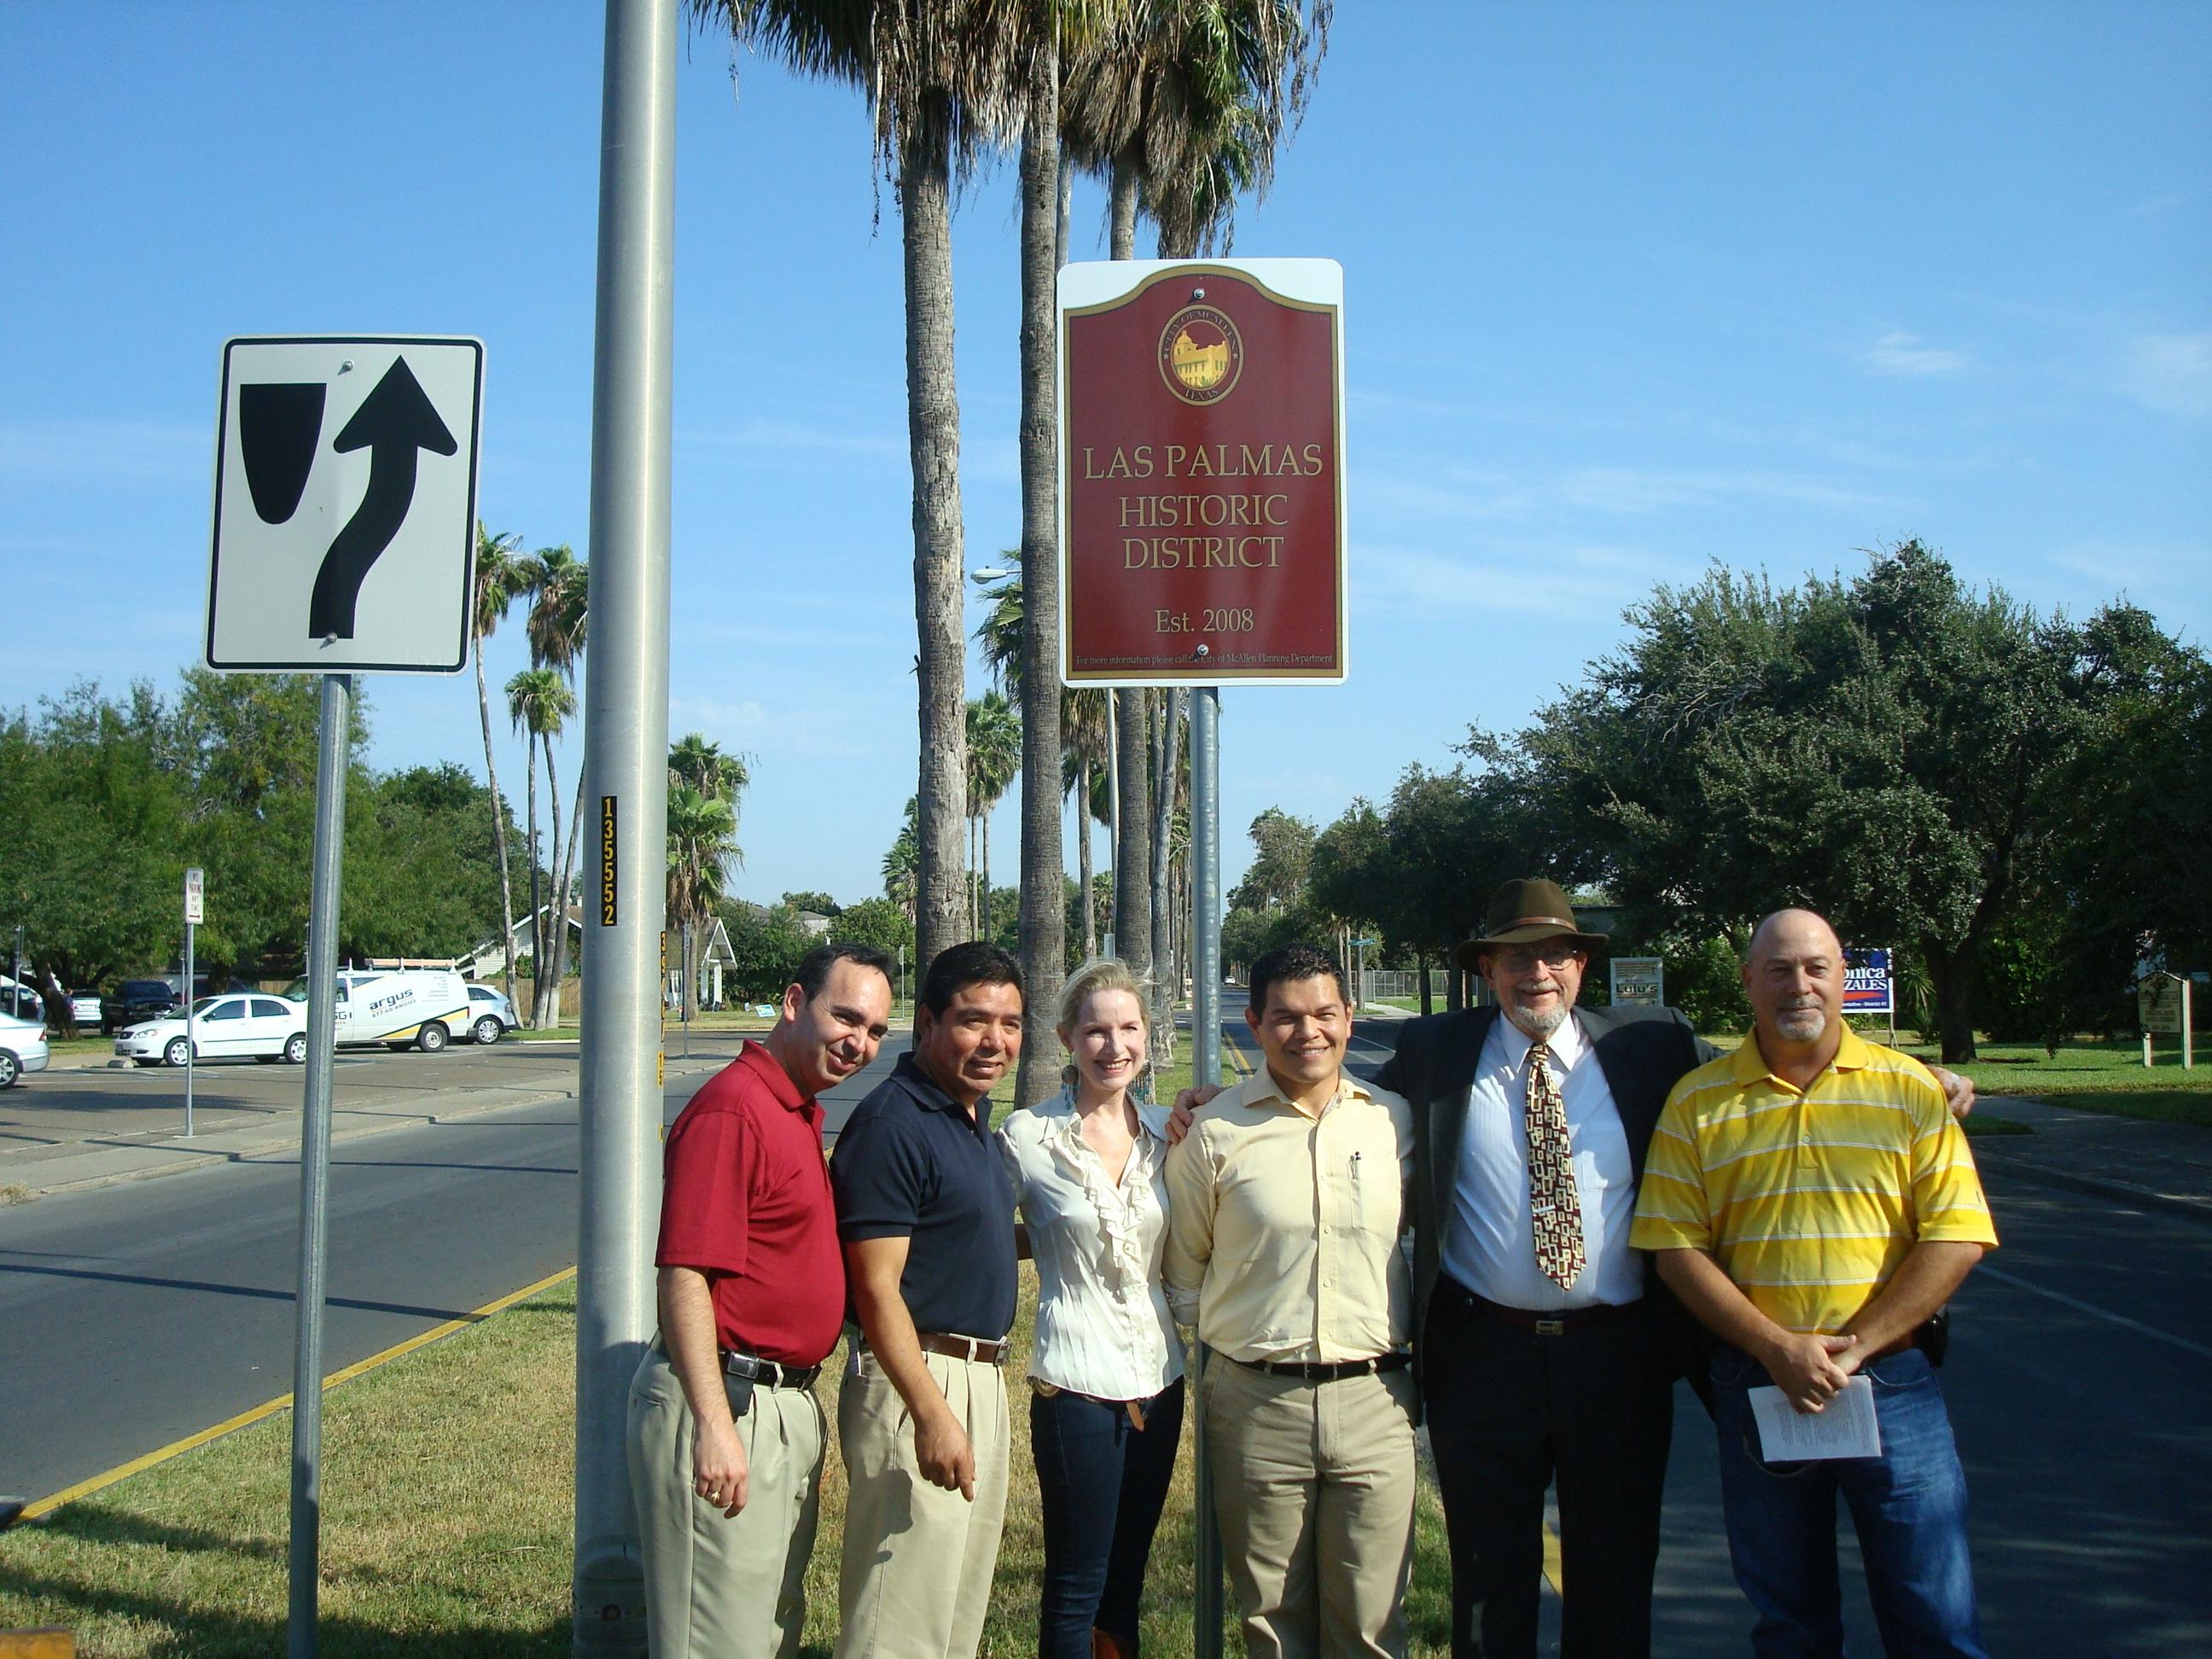 Unveiling of sign announcing the Las Palmas Historic District